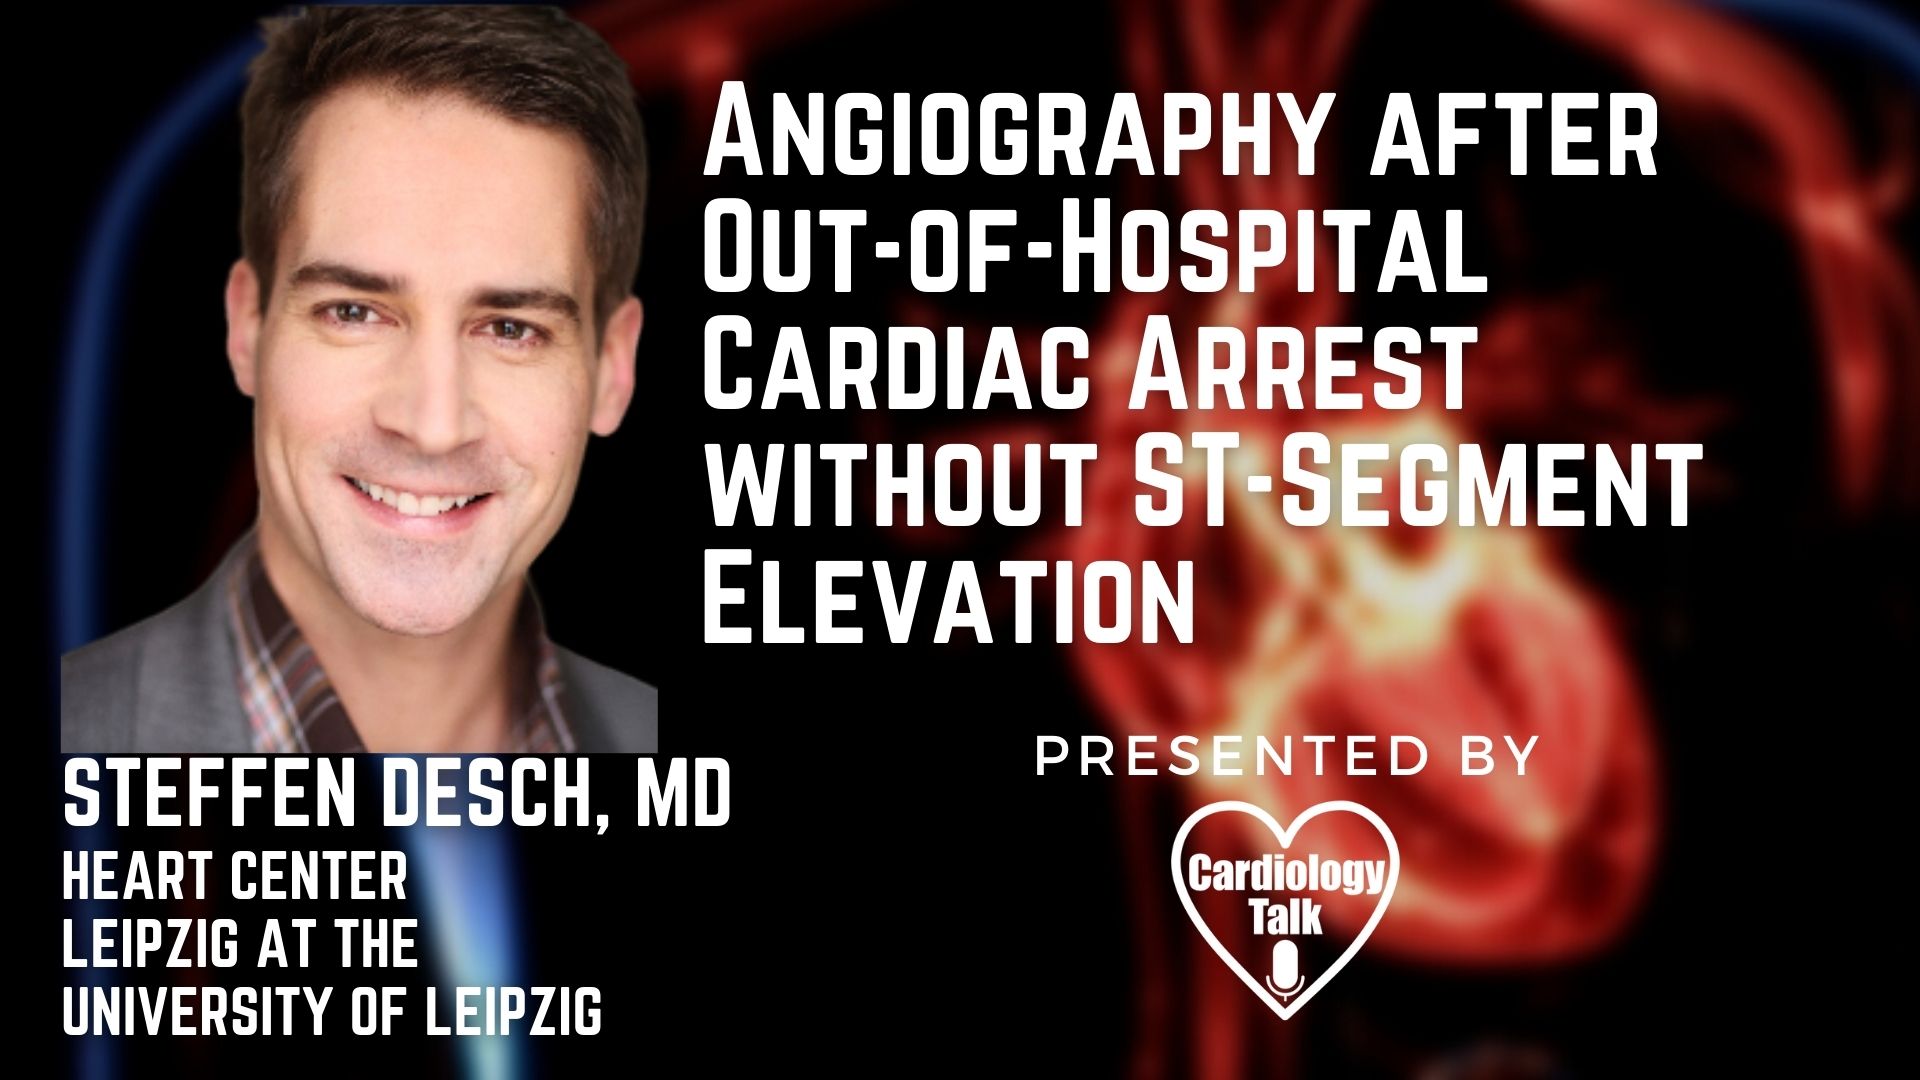 Steffen Desch, MD @UniLeipzig @leipzig_heart #TOMAHAWK #CardiacArrest #Cardiology #Research Angiography after Out-of-Hospital Cardiac Arrest without ST-Segment Elevation